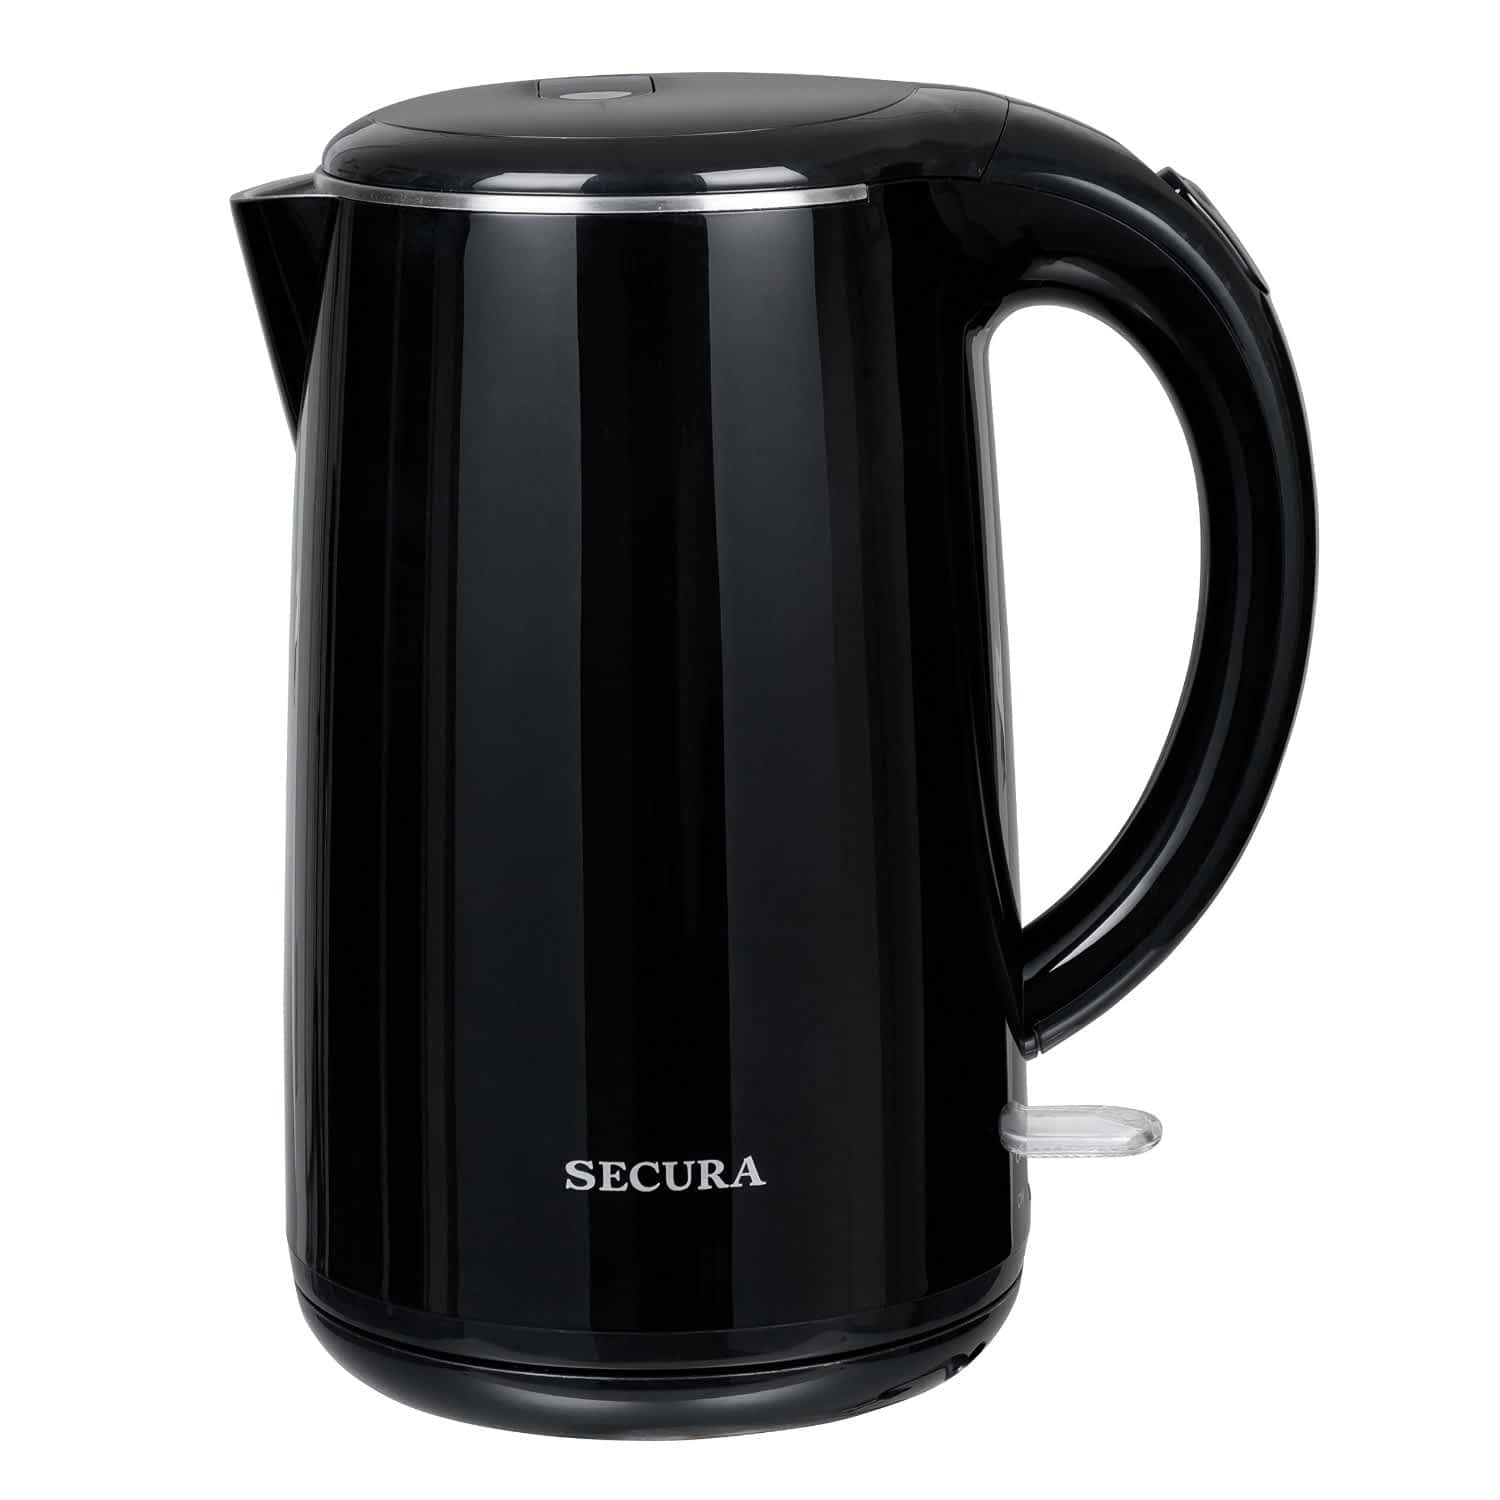 secura kettle review